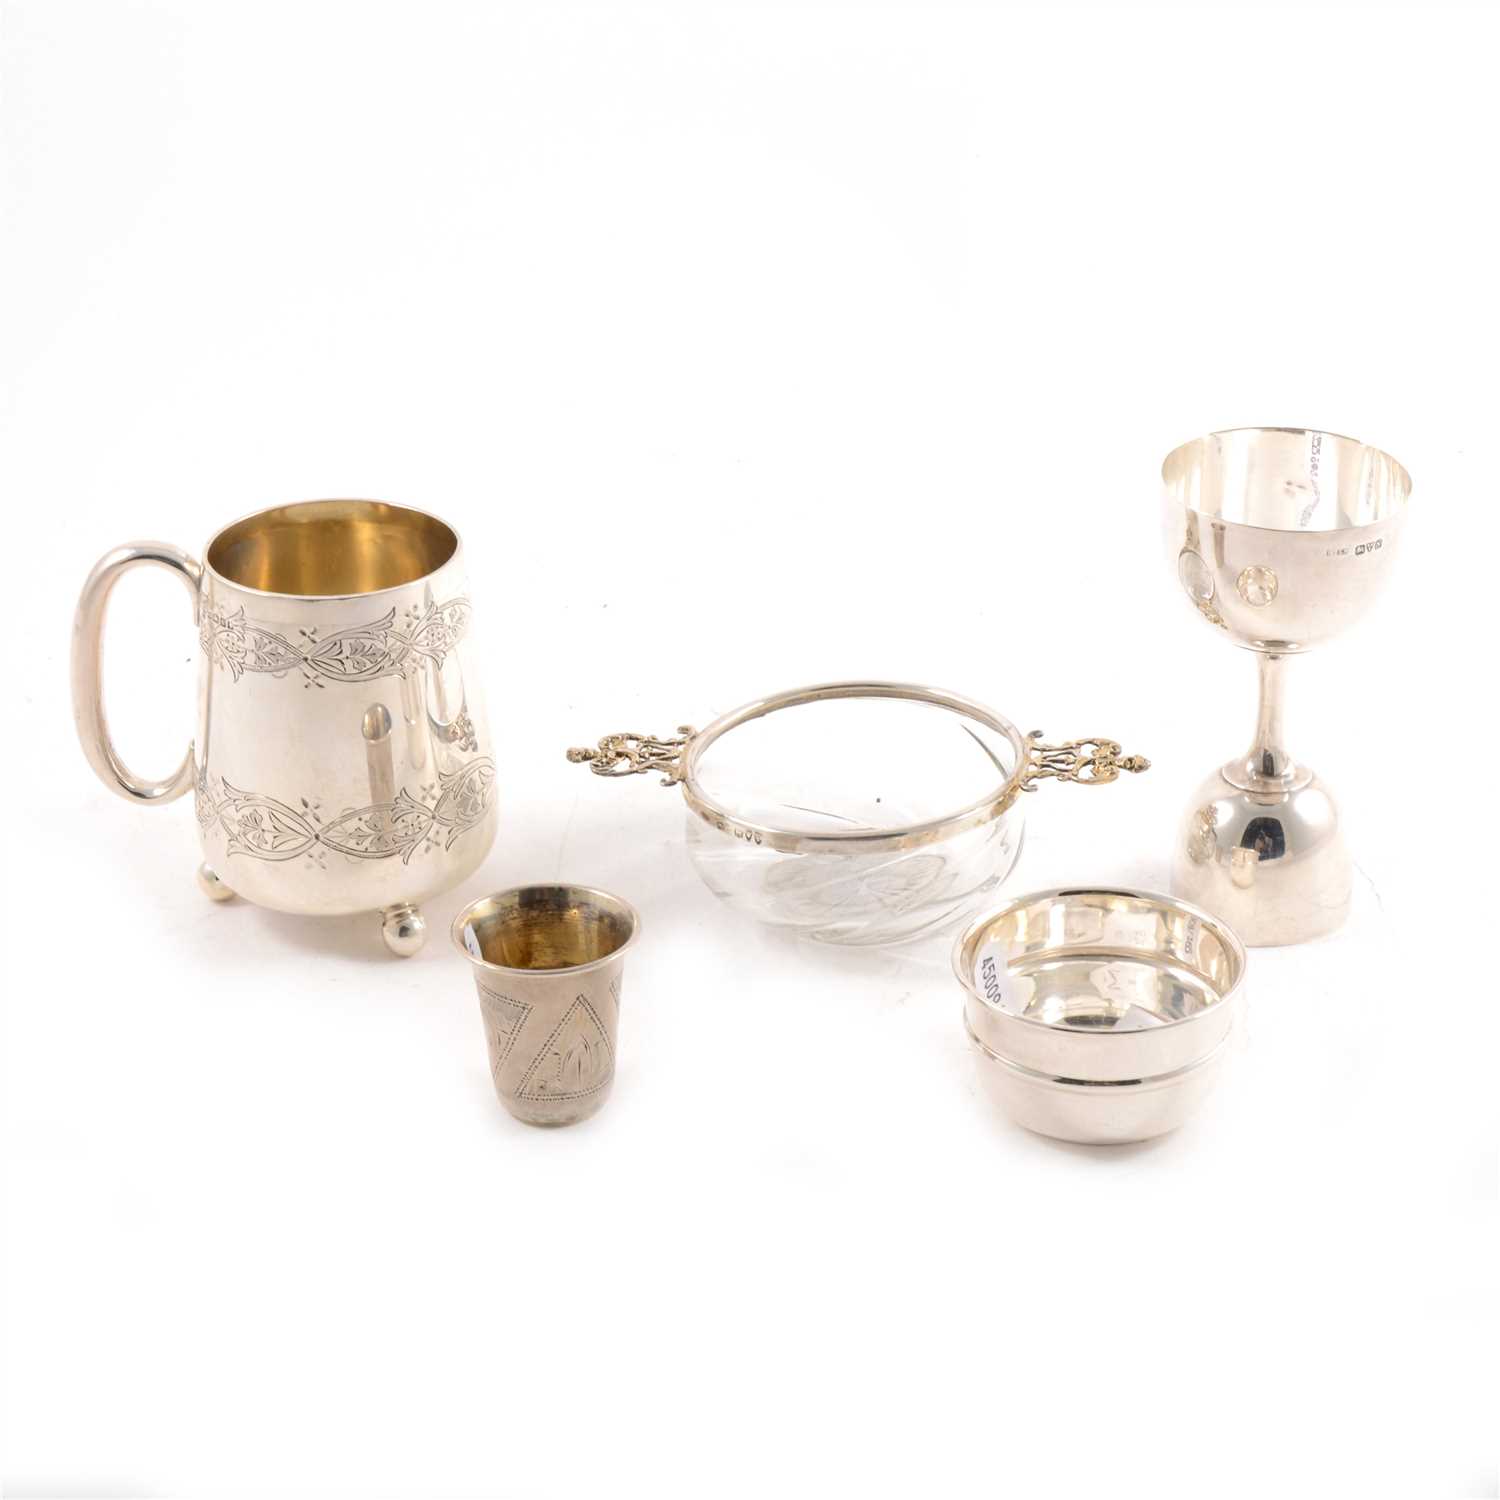 Lot 185 - A quantity of small silver, to include a christening mug, small cup, double jigger, Russian thimble and silver-mounted quaiche